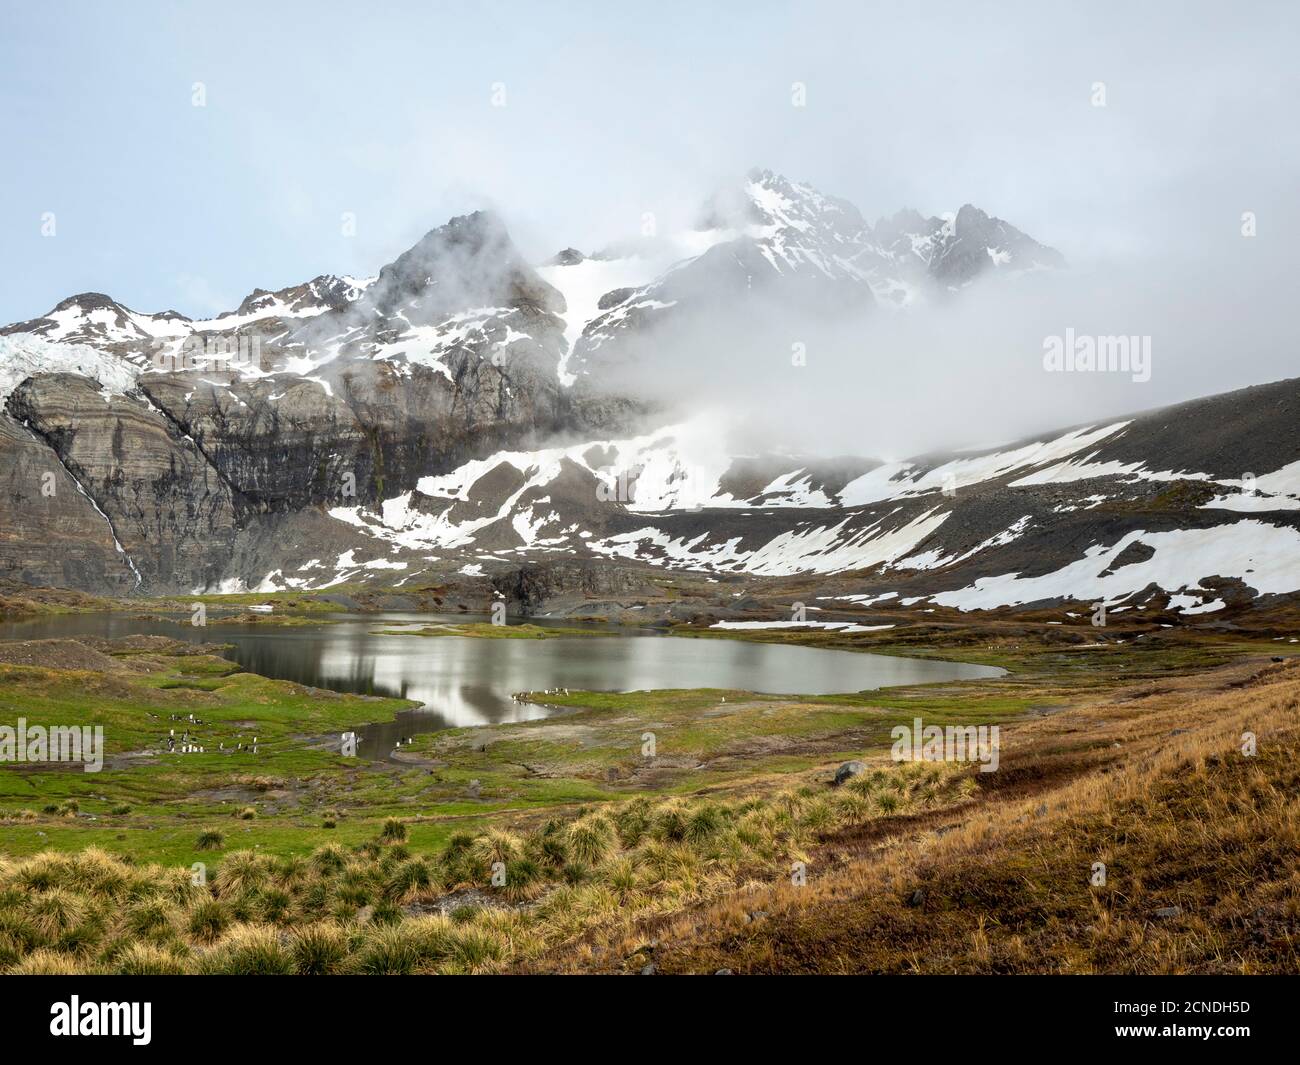 Snow-covered mountains and glacial meltwater lake in Gold Harbor, South Georgia, Polar Regions Stock Photo